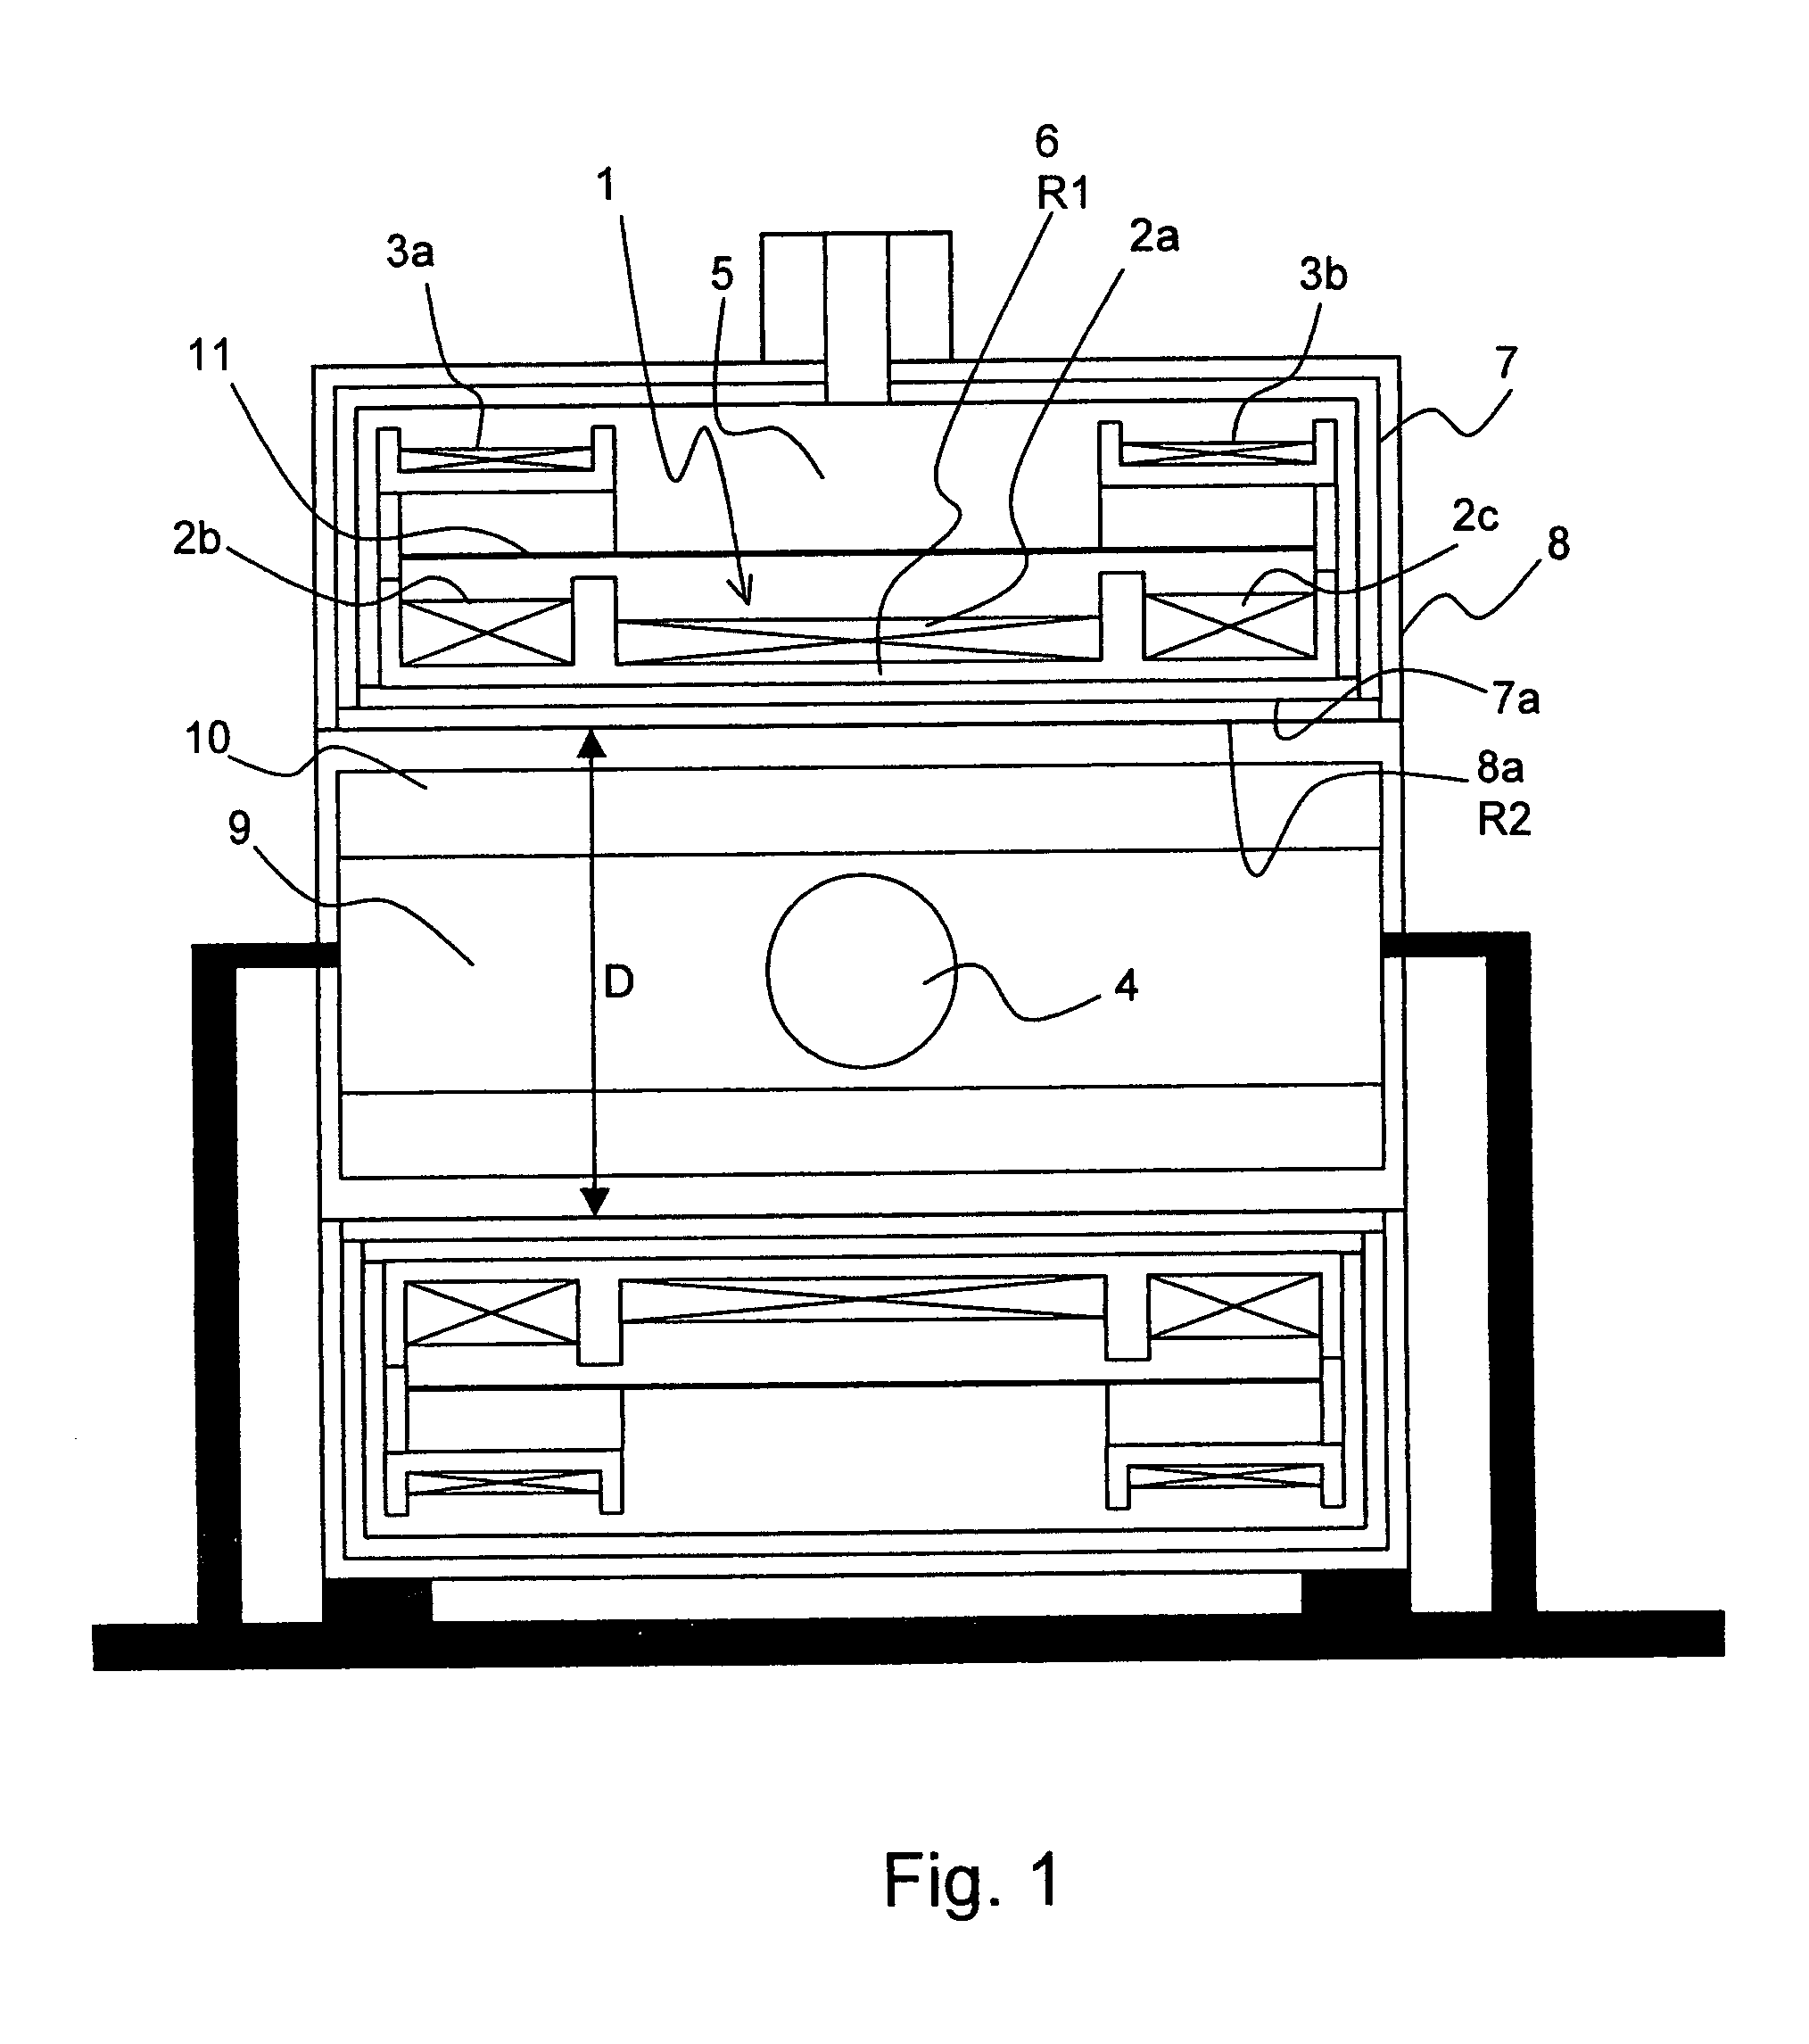 Superconducting magnet configuration with reduced heat input in the low temperature regions